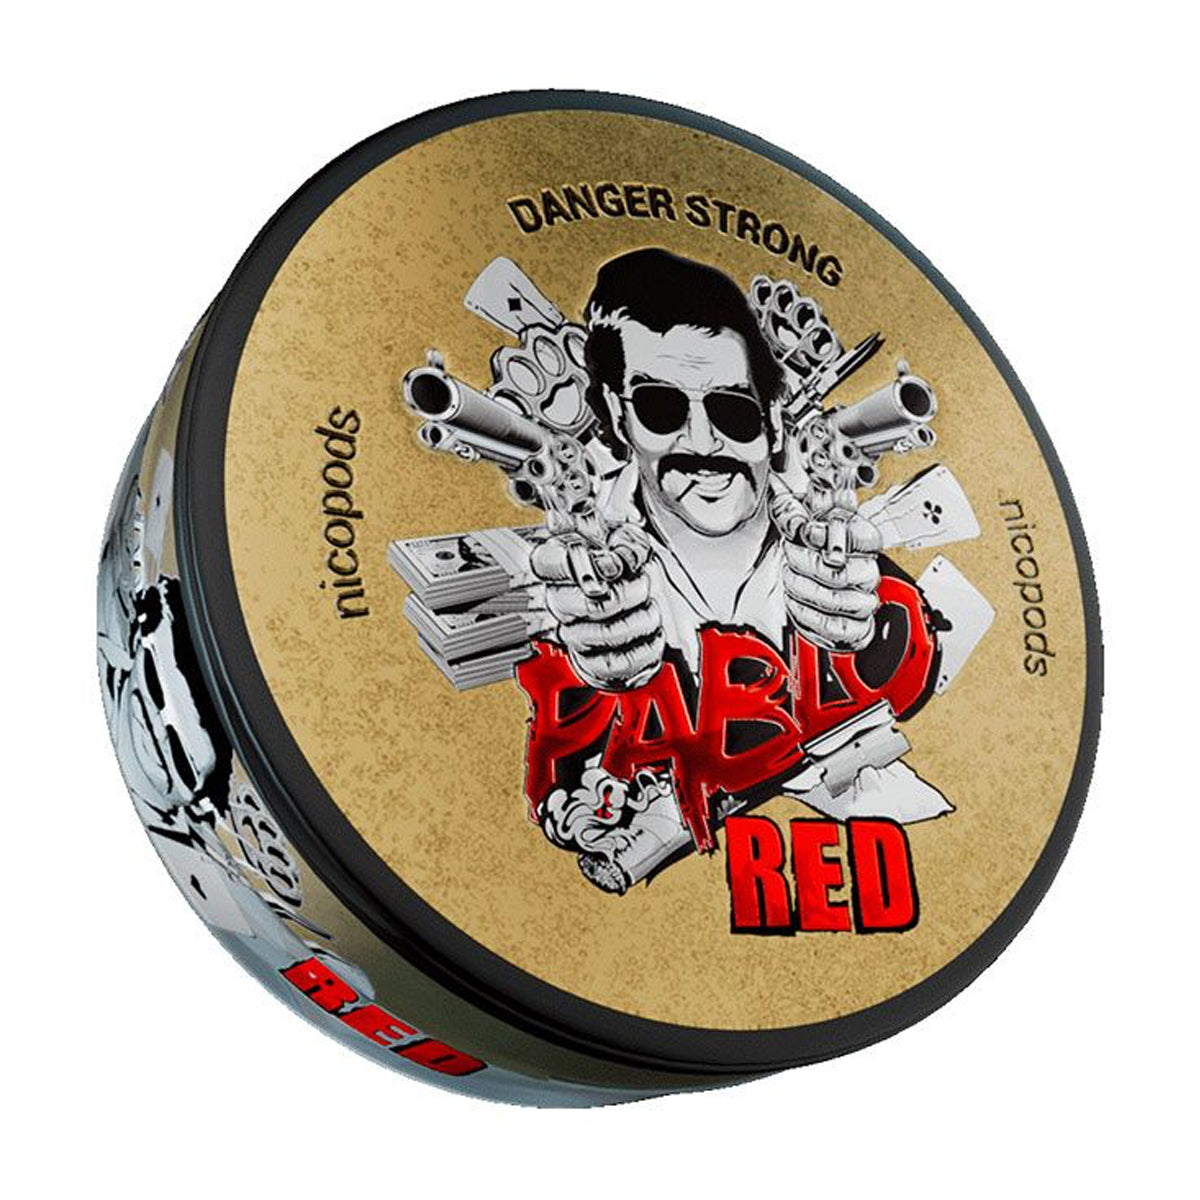 Red Nicotine Pouches By Pablo Danger Strong